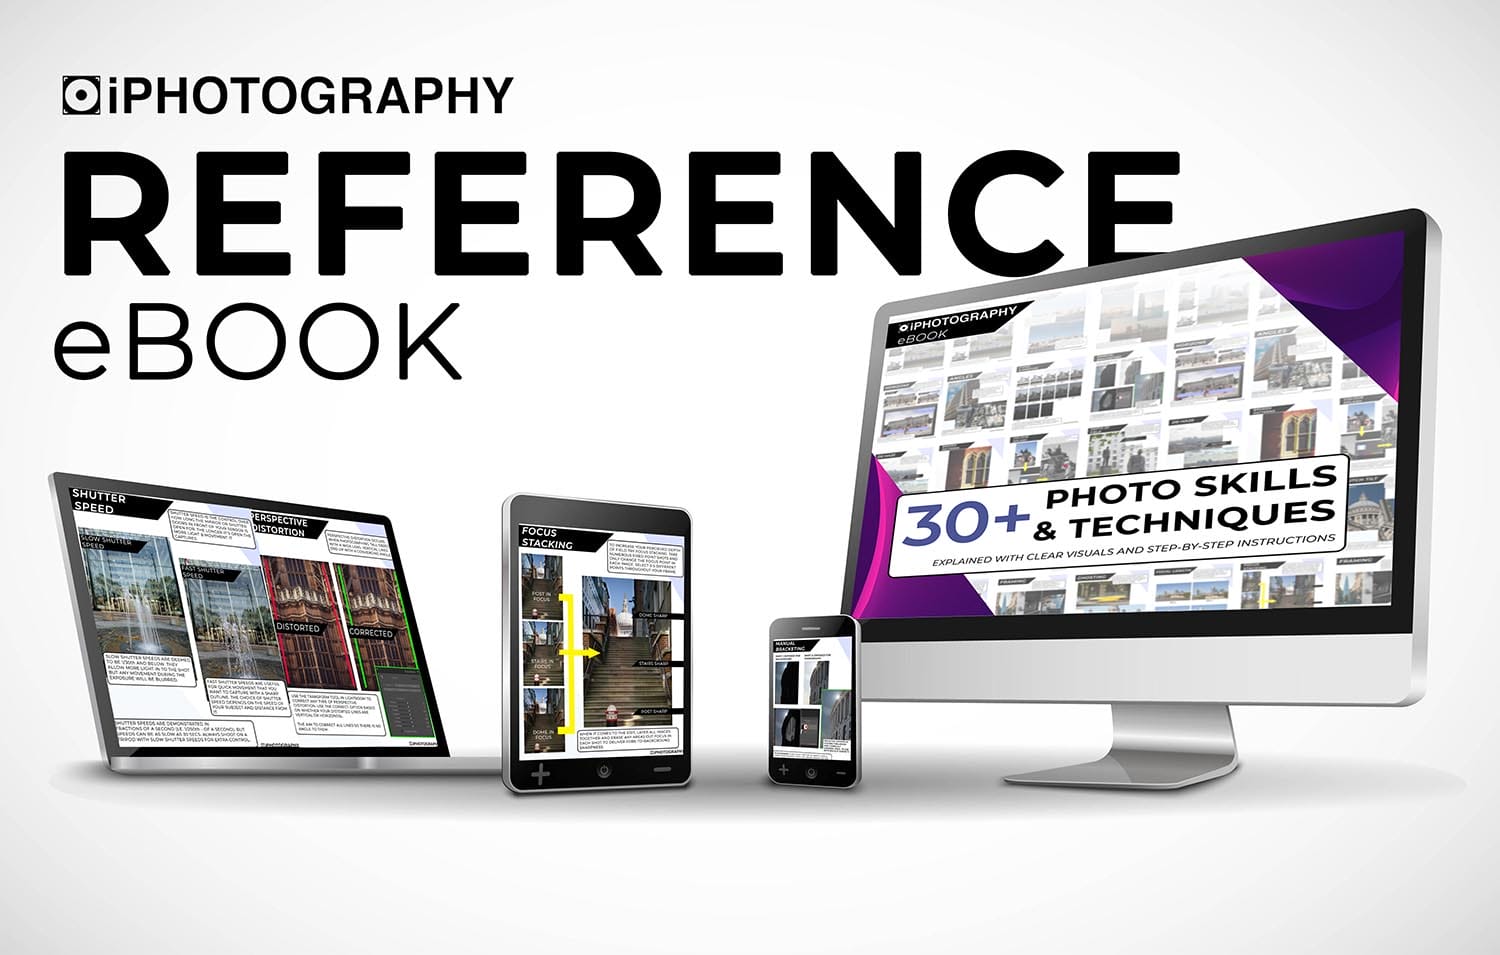 Photography Reference & Skills eBook by iPhotography.com